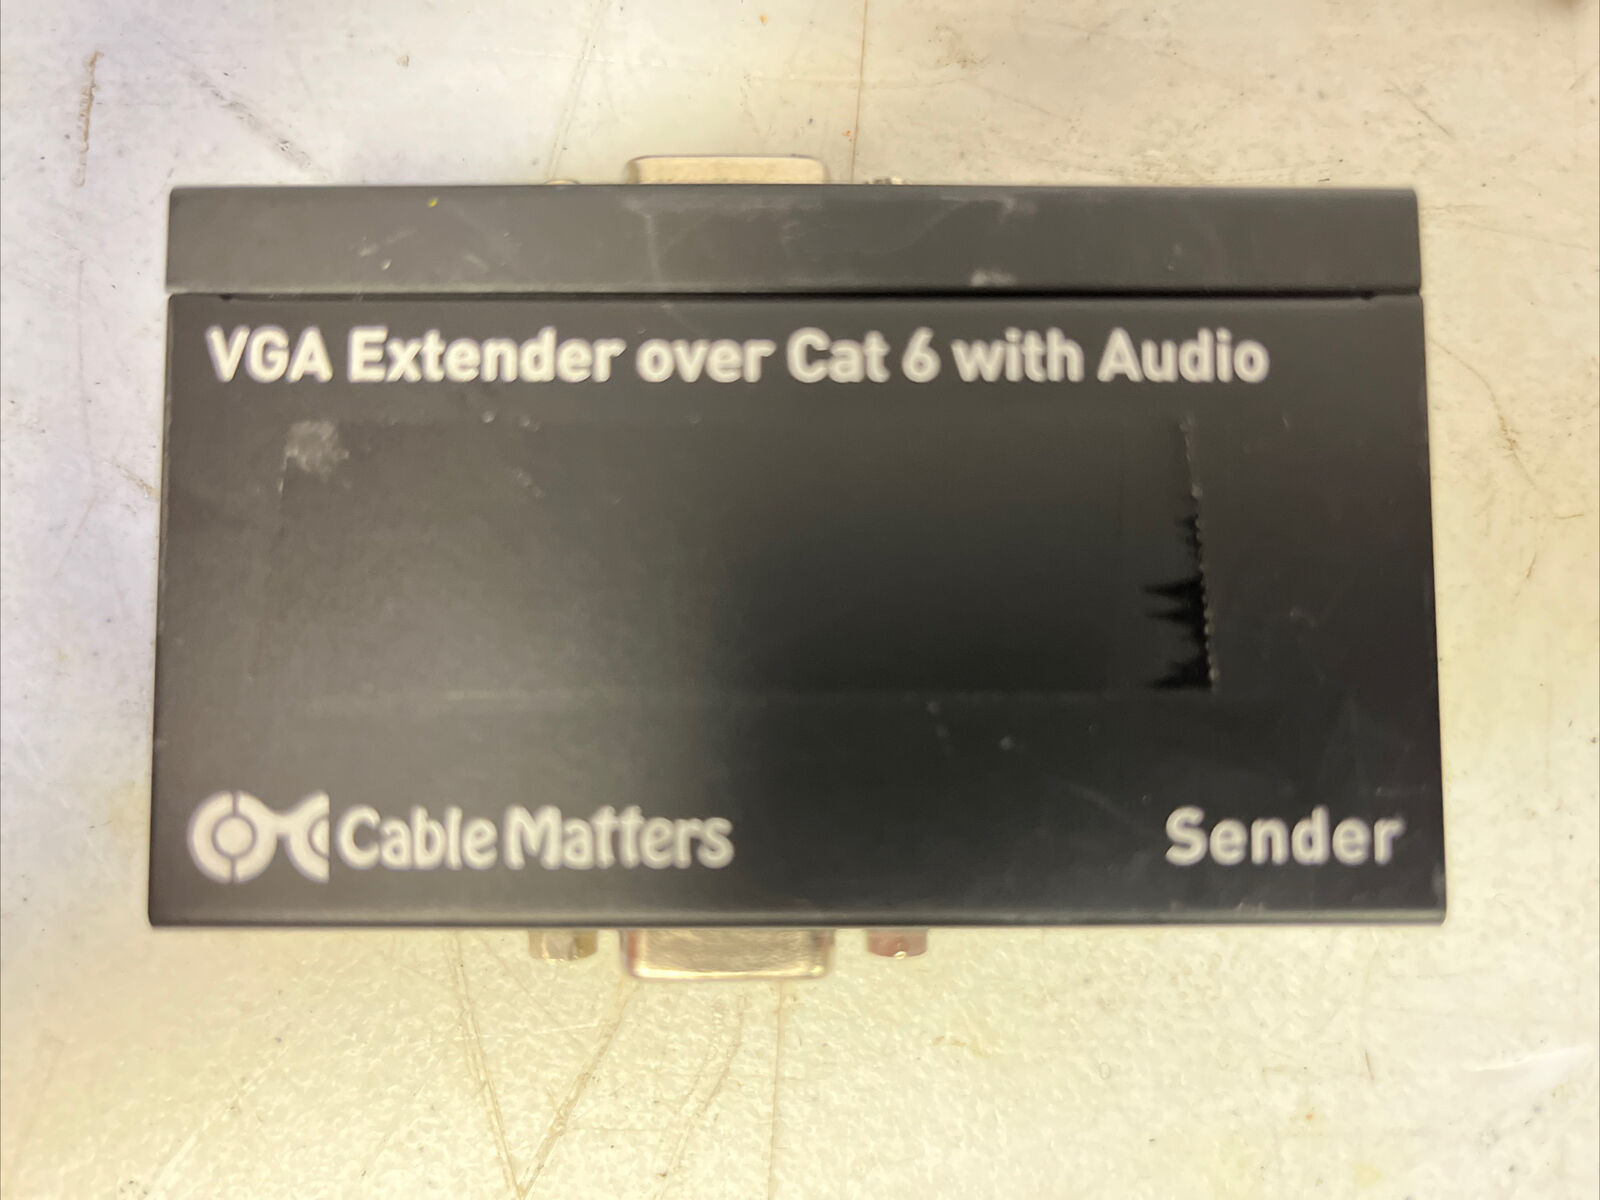 Cable Matters VGA Extender Over Cat 6 With Audio ***Sender Only***